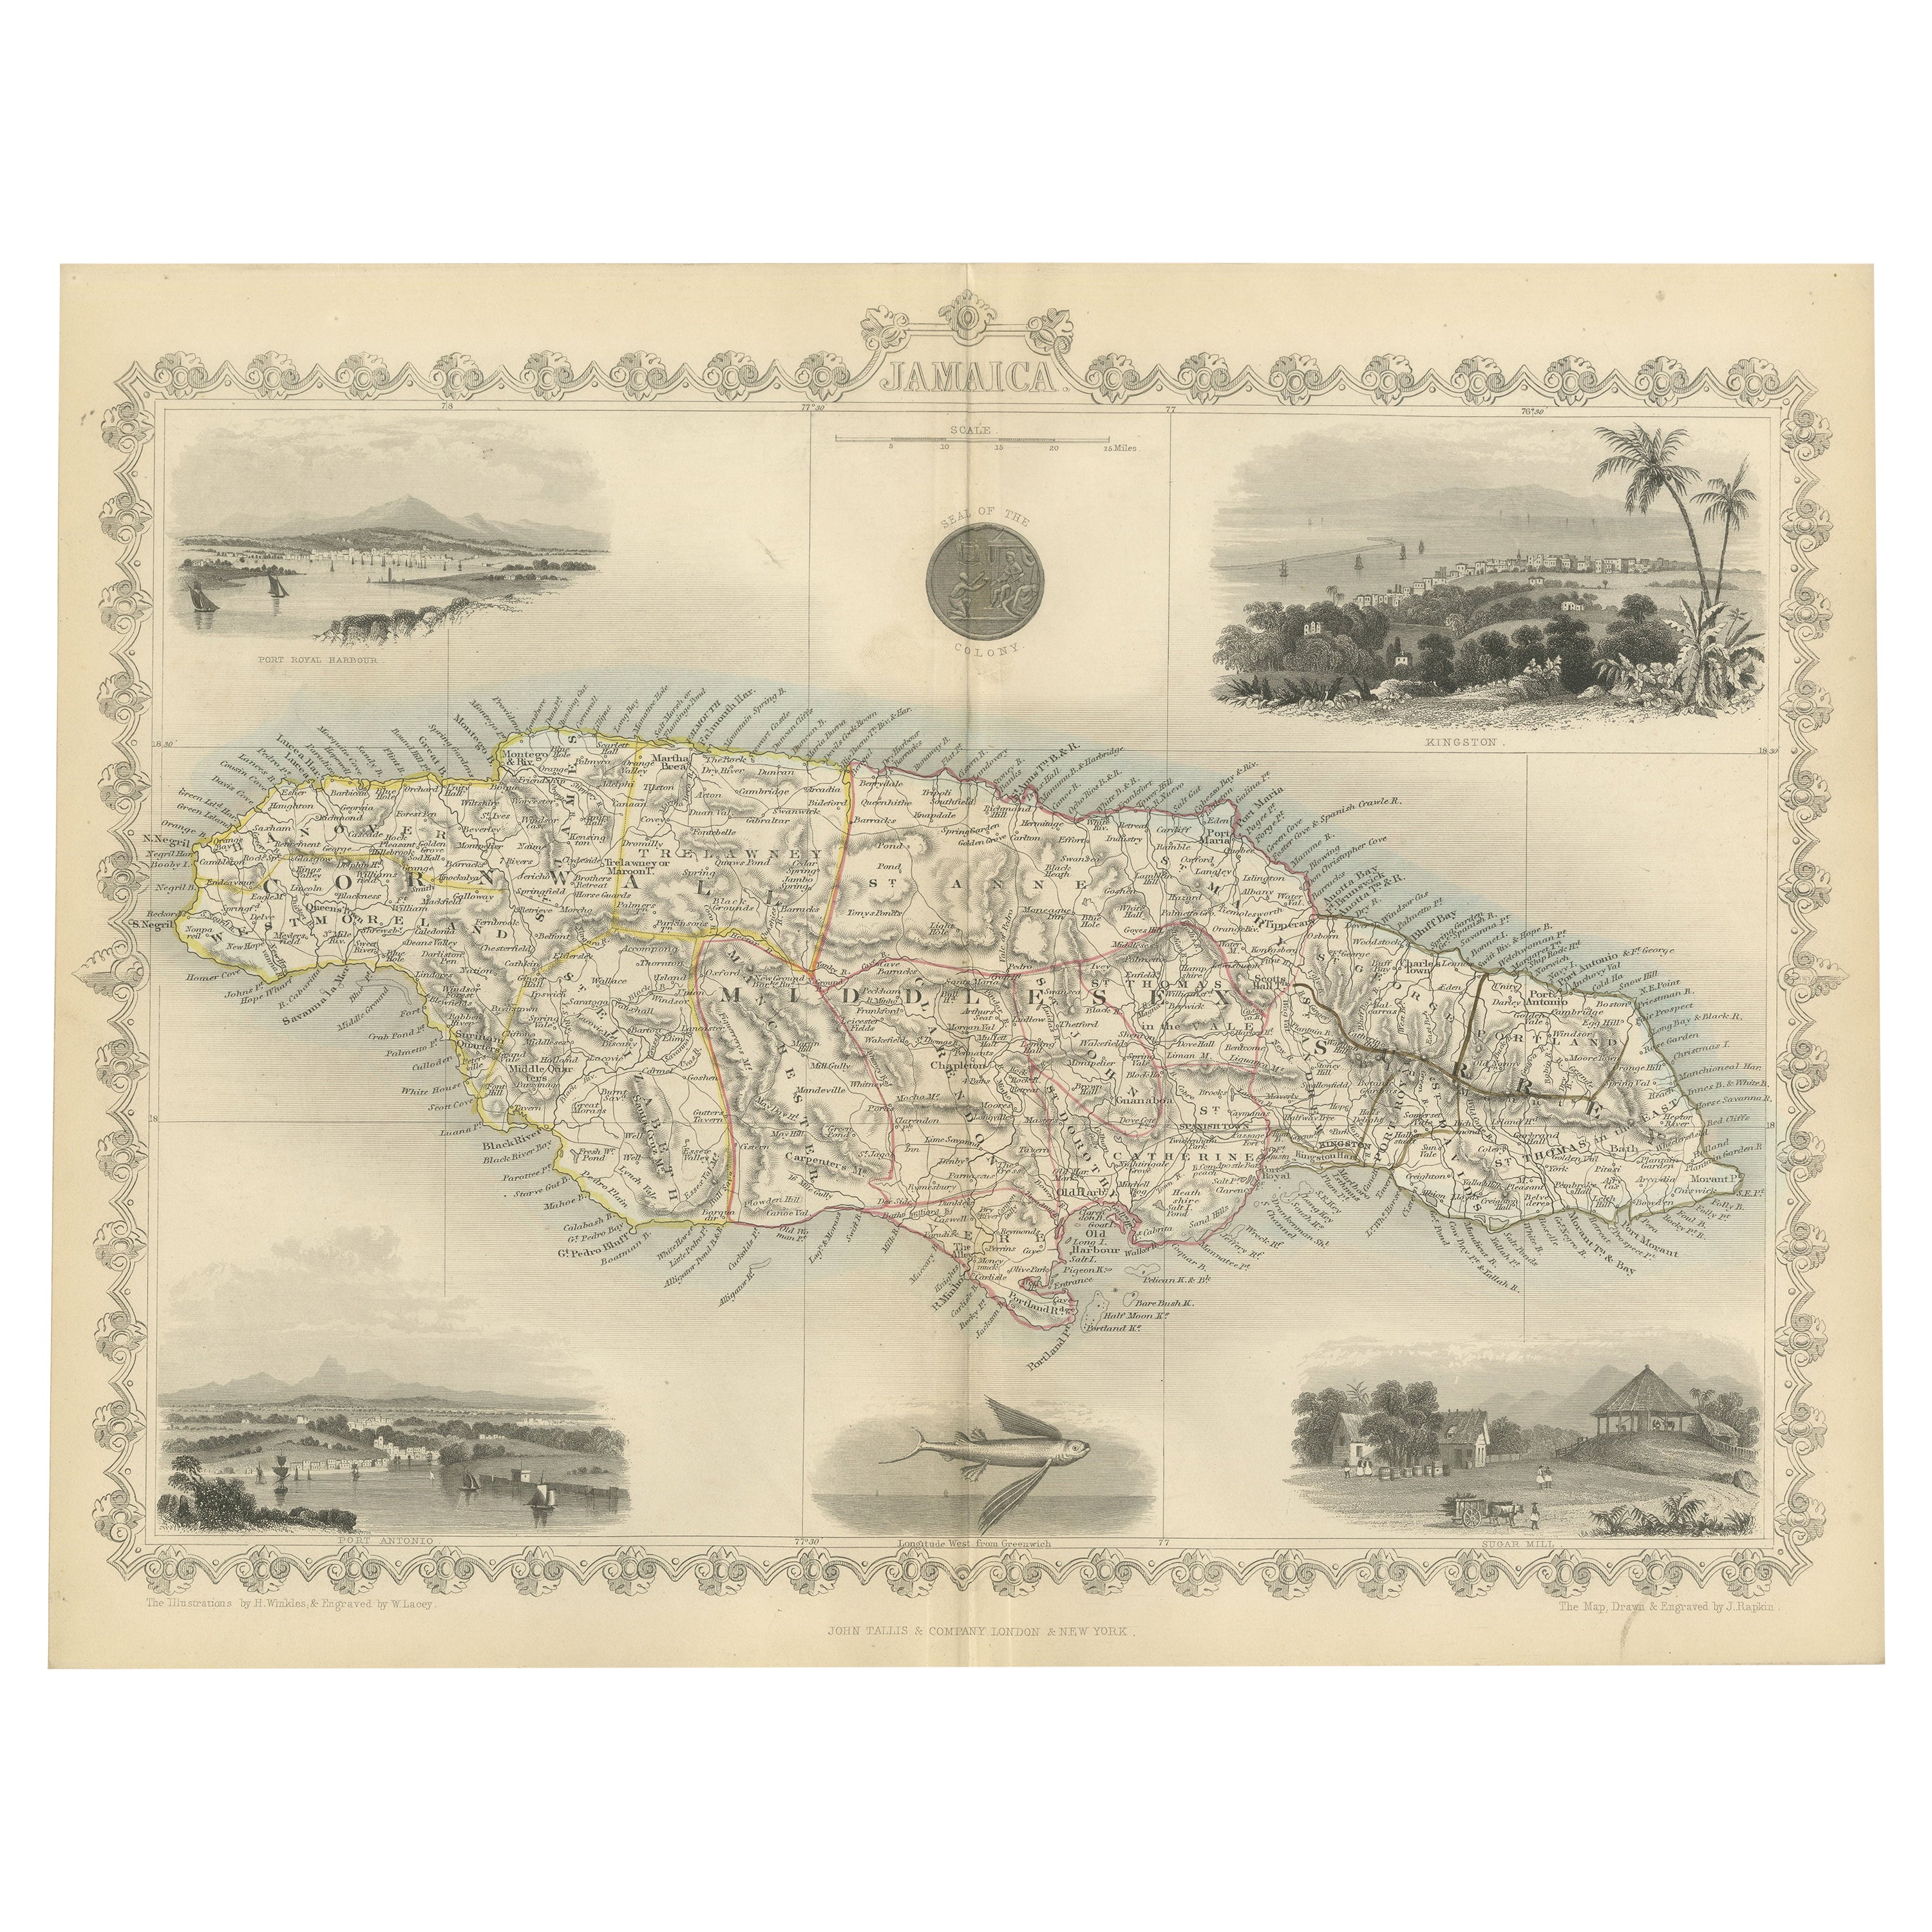 An Ornate and Historical Tallis Map of Jamaica with Decorative Vignettes, 1851